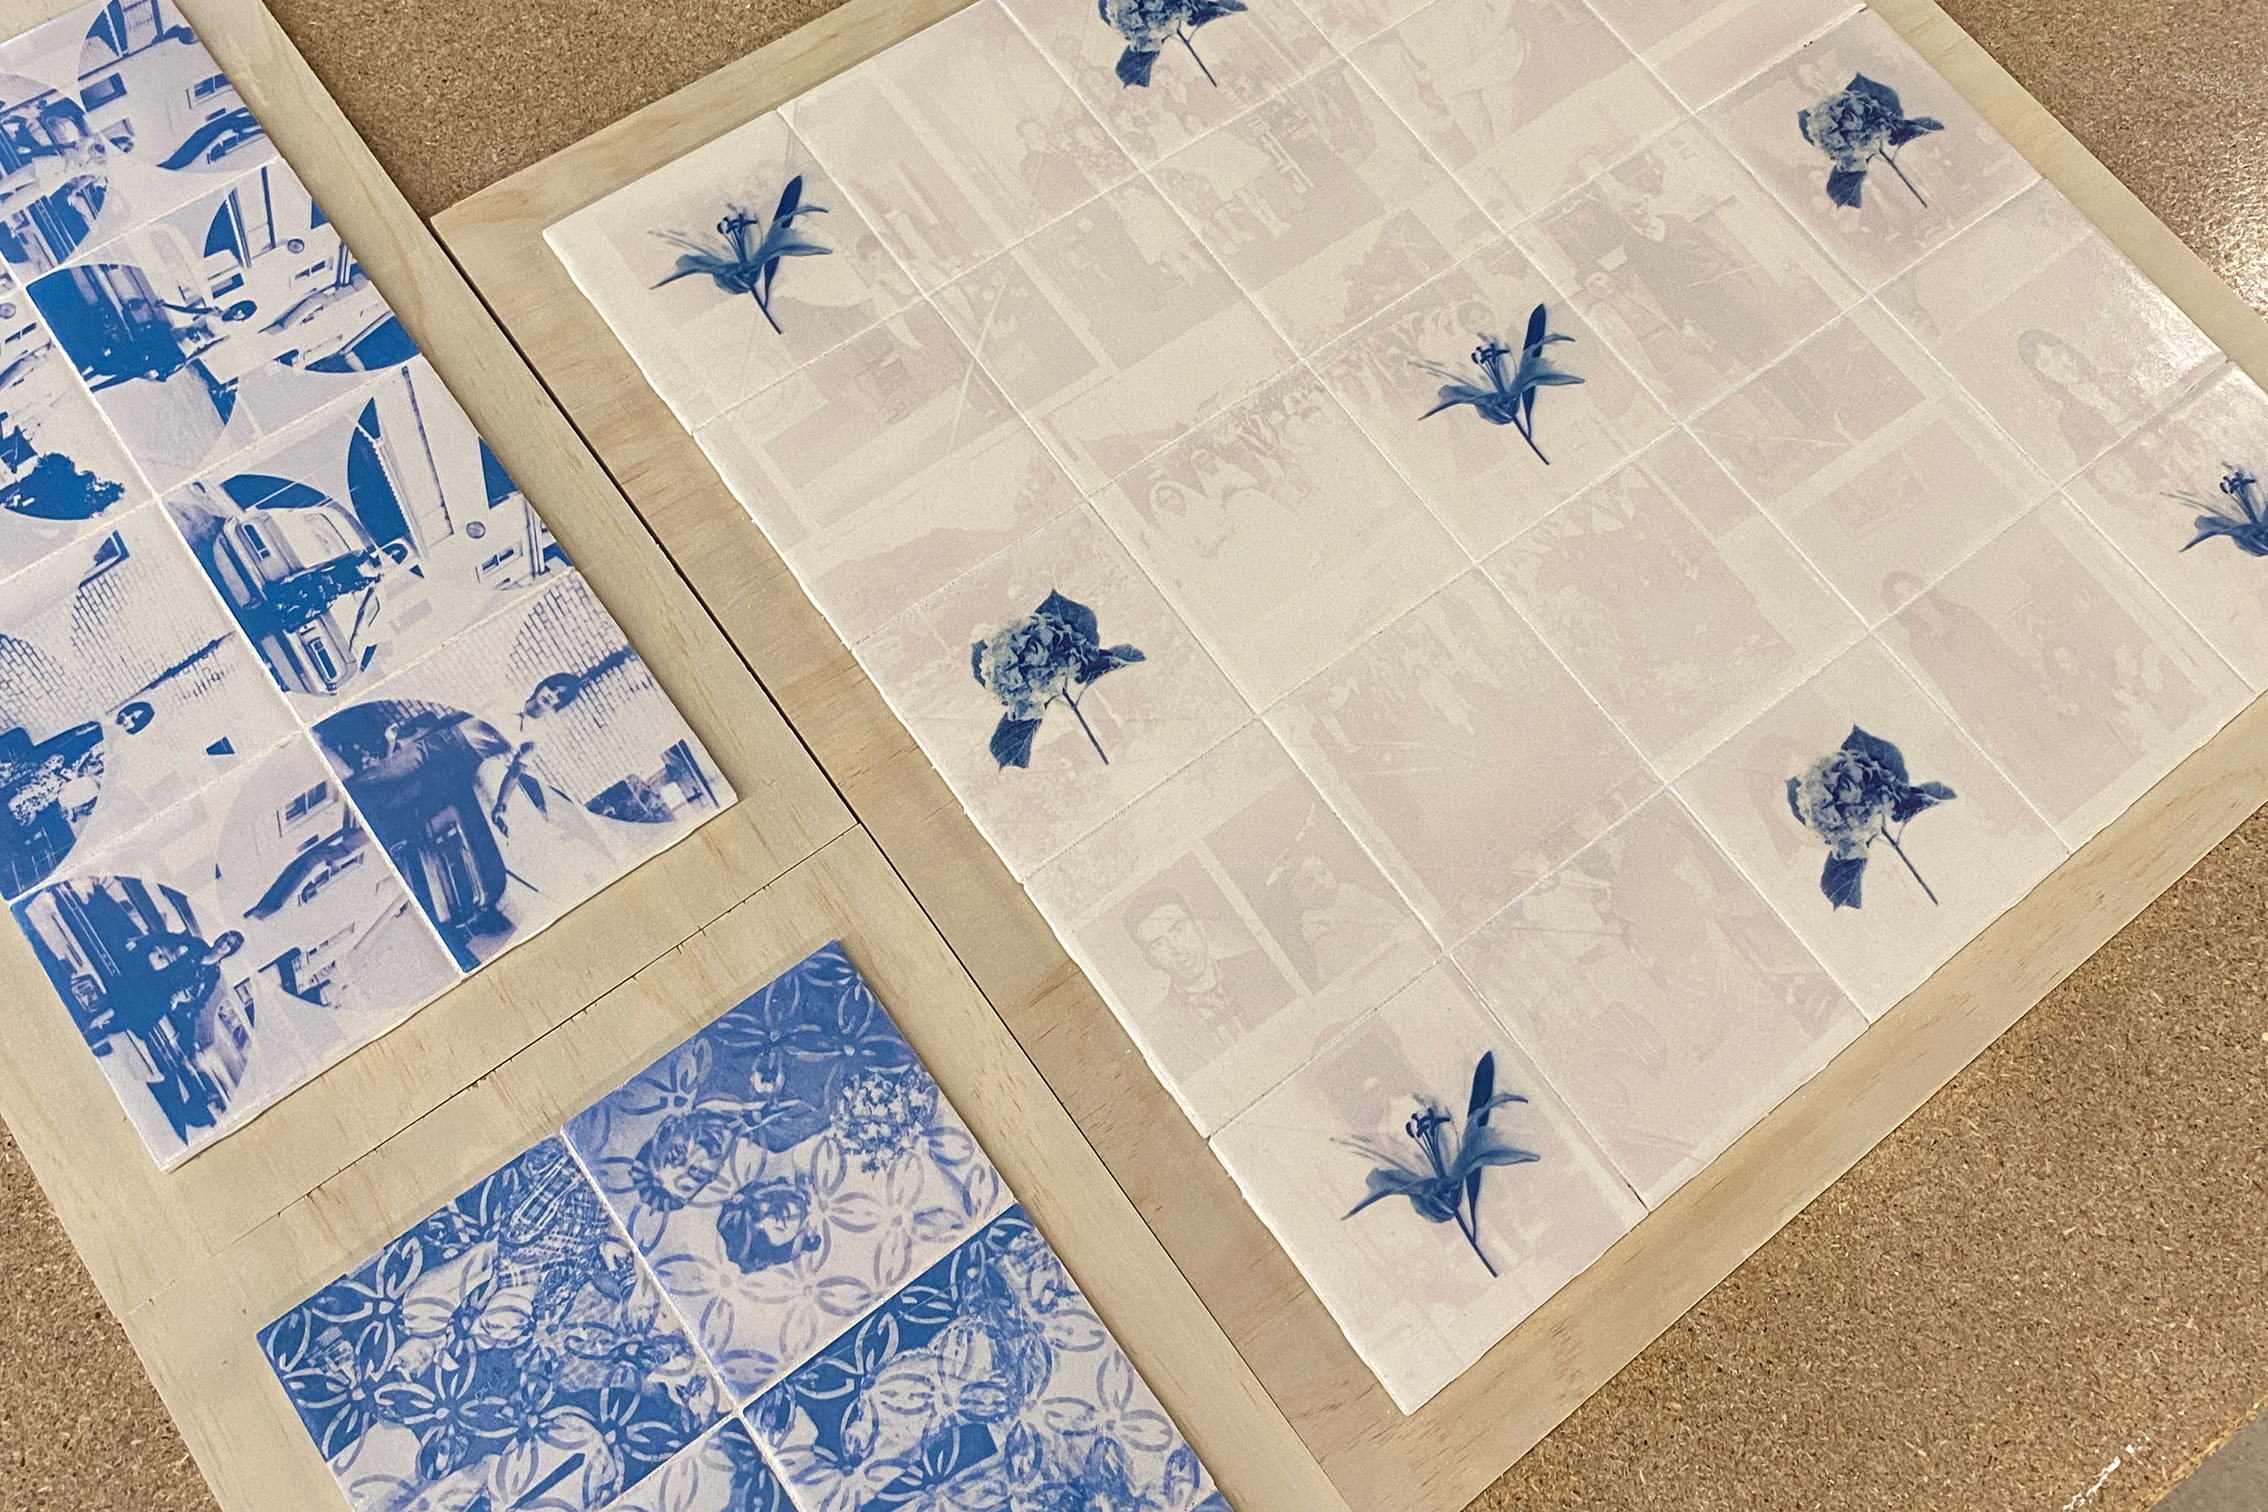 Blue and grey images printed on to translucent material, resembling blue-and-white pottery. 